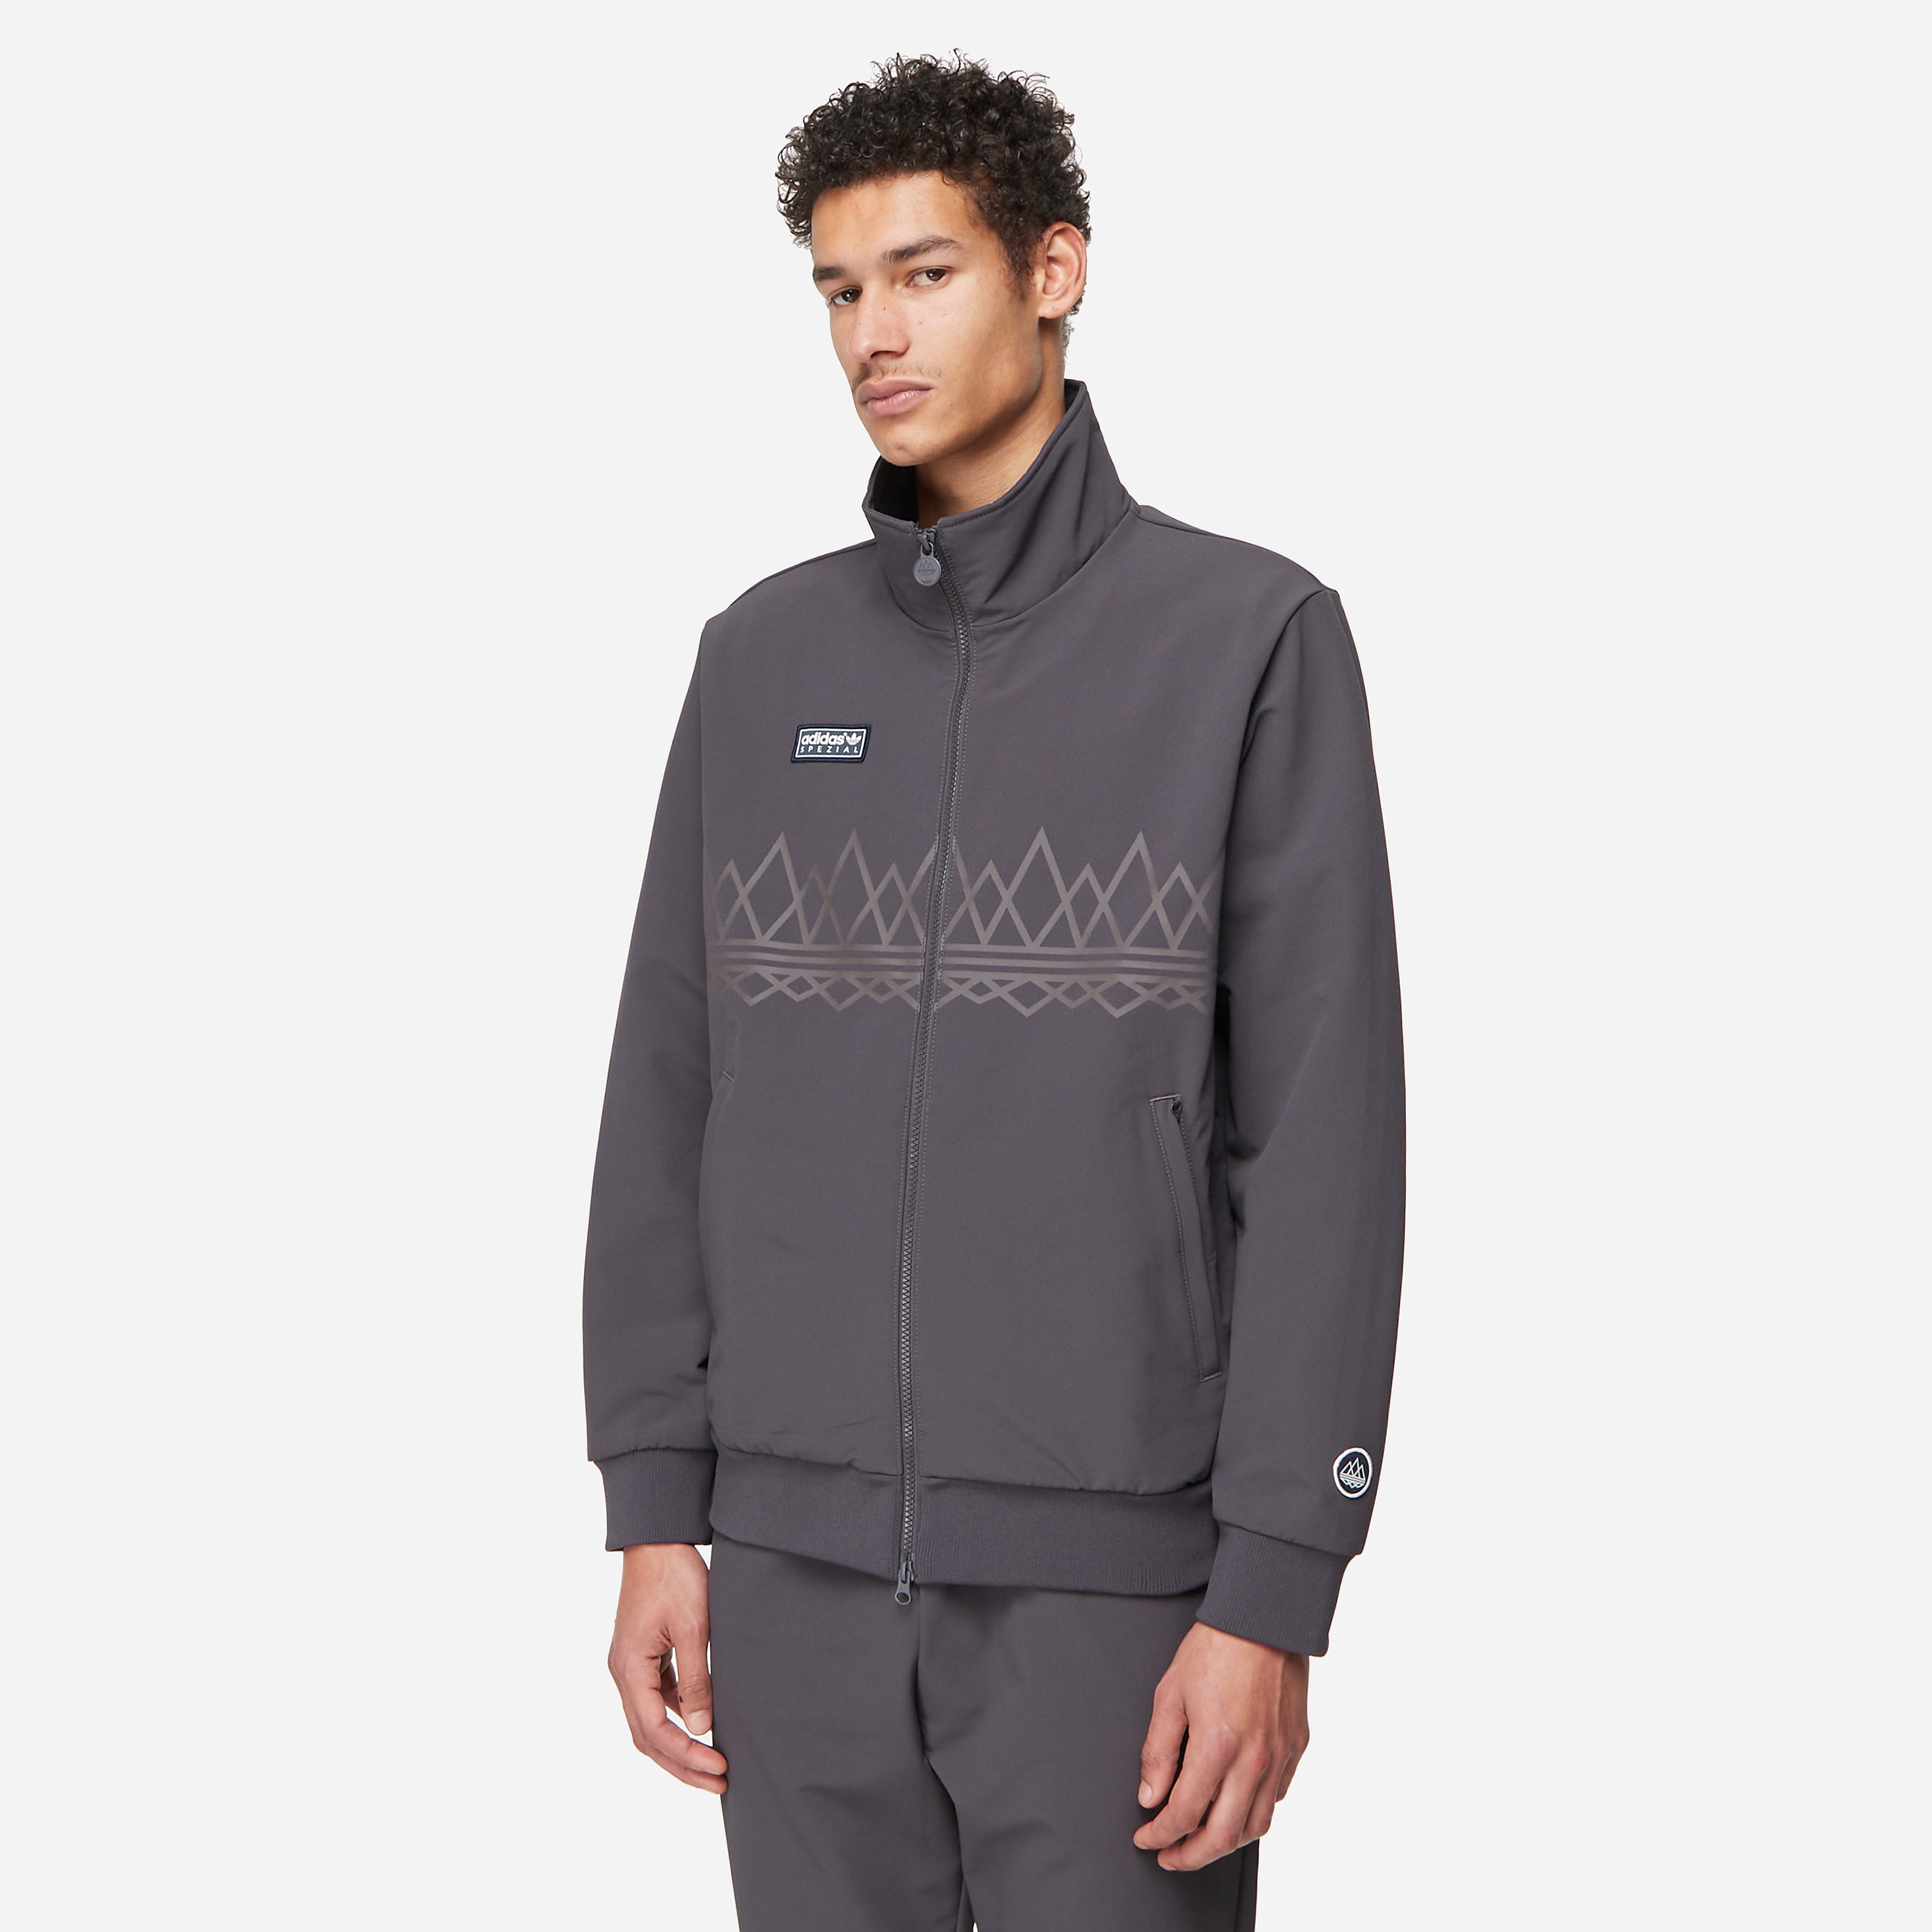 adidas SPEZIAL Suddell Track Top, Grey